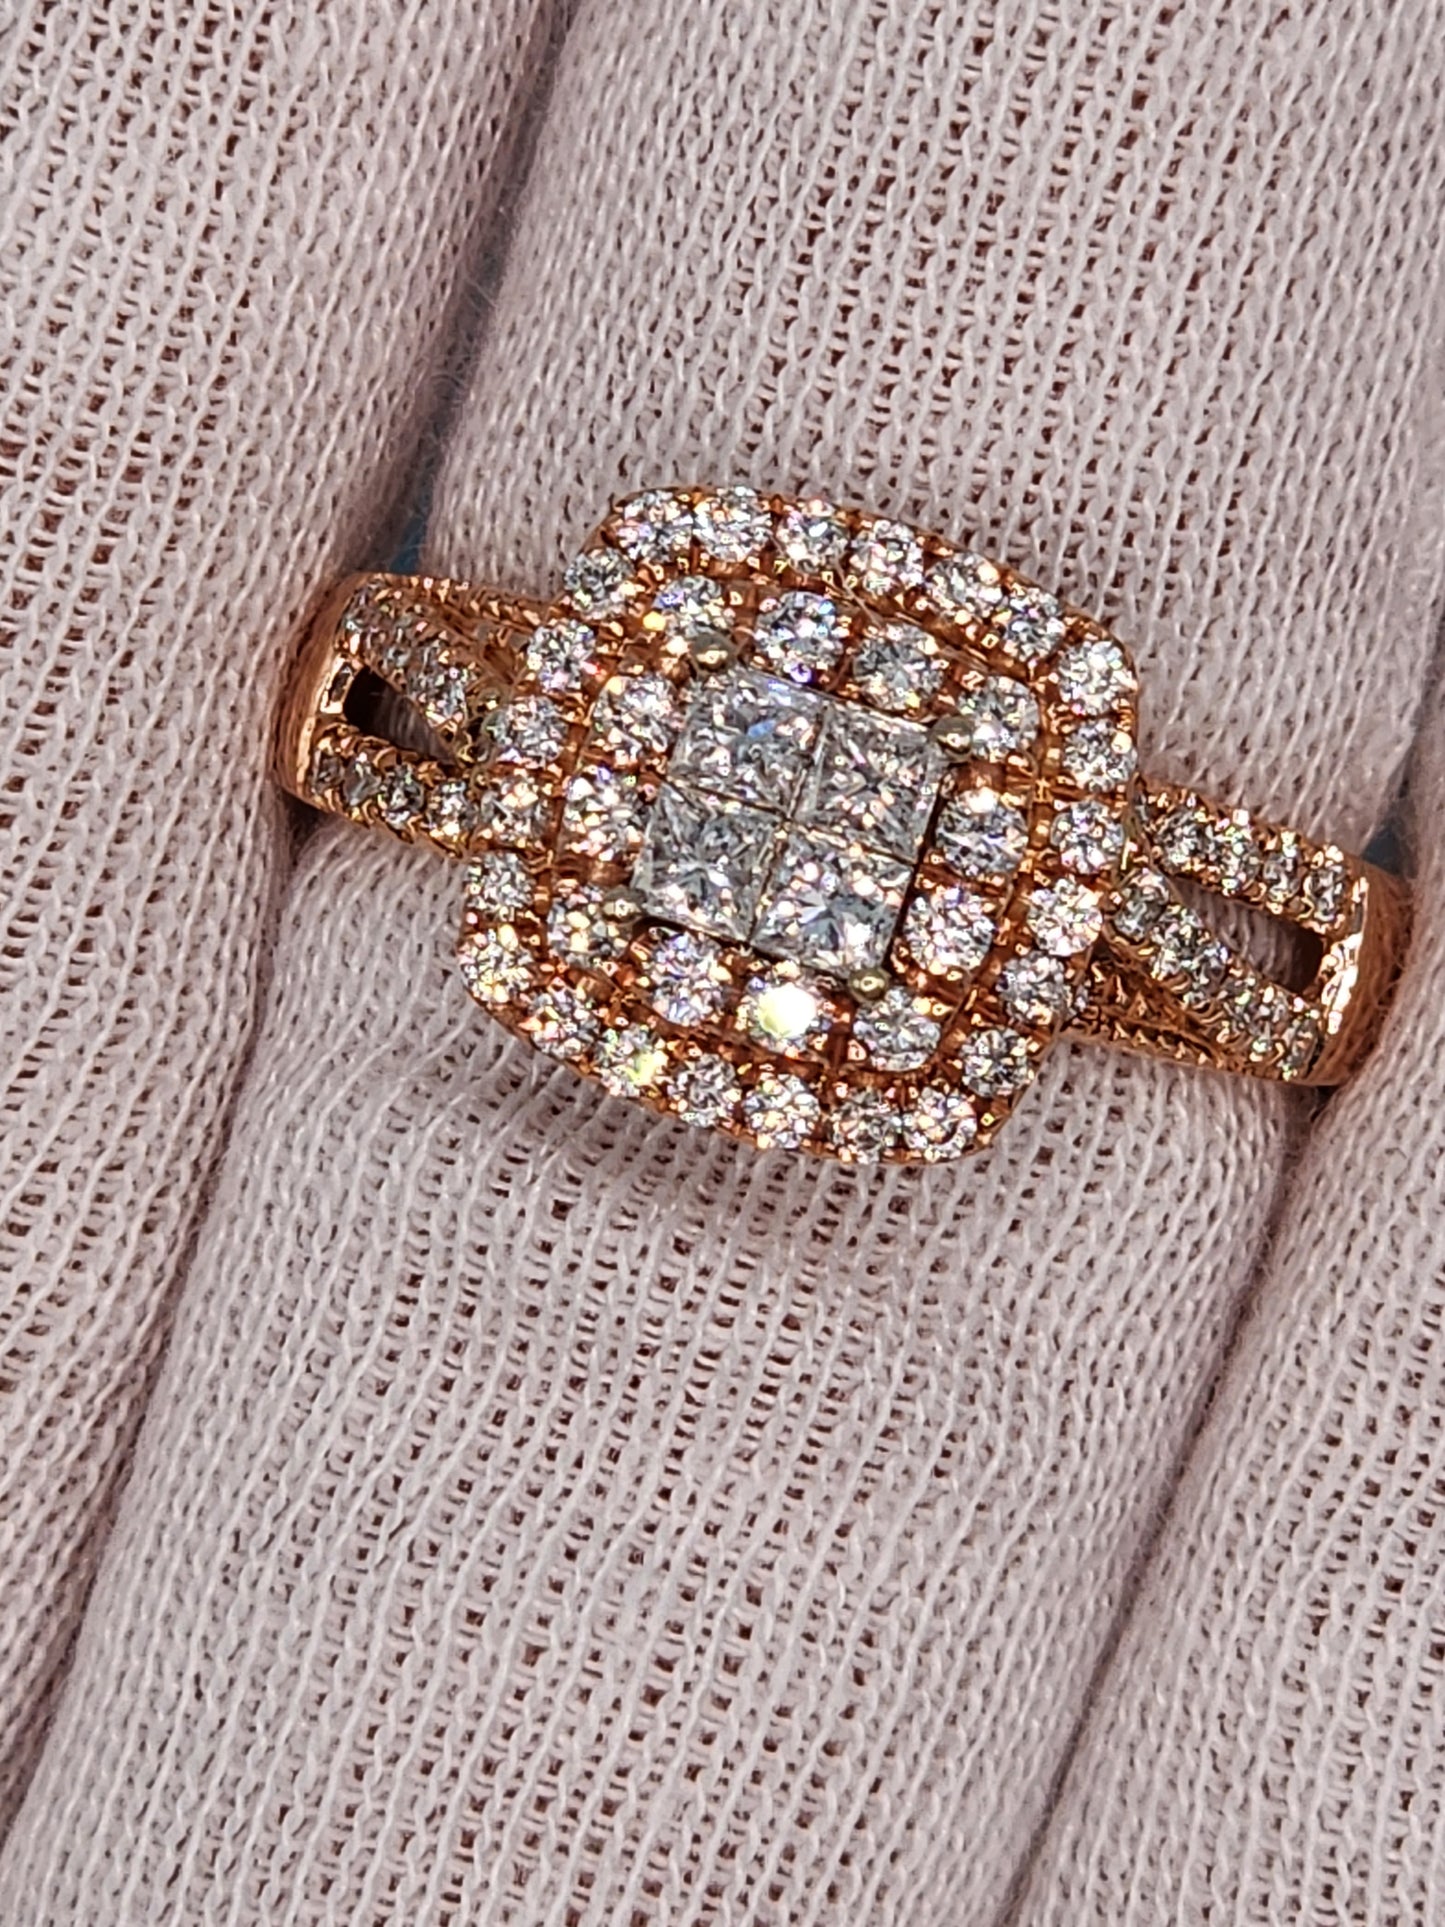 Ladies Double Halo Diamond Cluster Engagement/Anniversary Ring in 14k Rose Gold